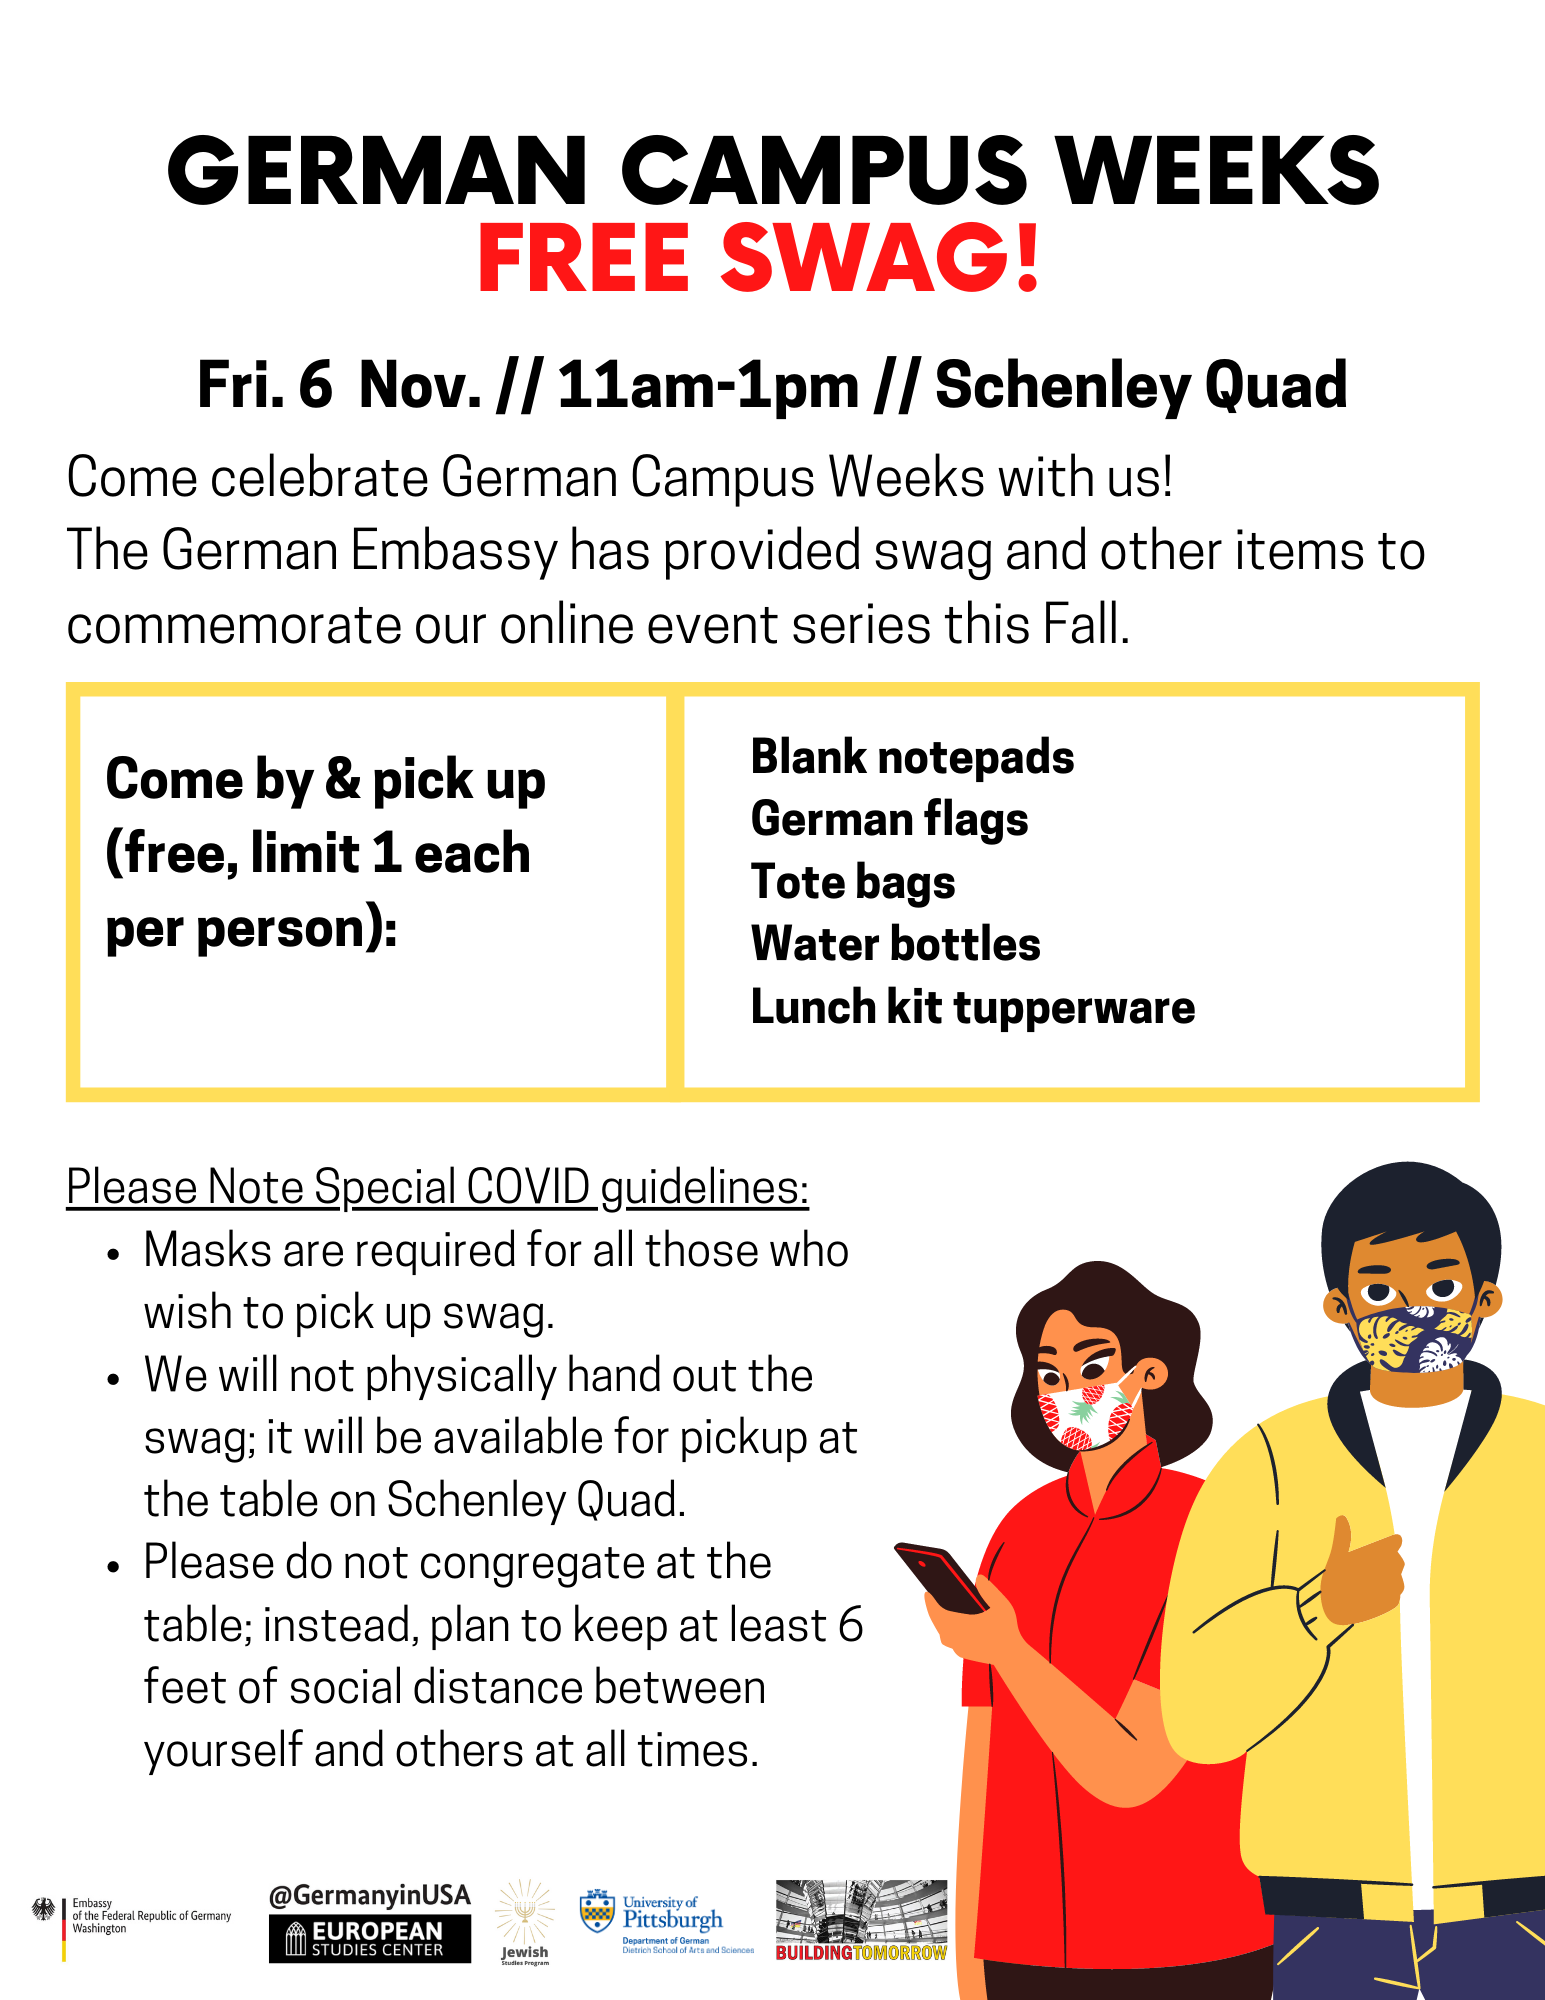 German Campus Weeks Free Swag on Friday November 6th from 11am to 1pm at the Schenley quad; Come by and pick up (free, limit 1 each per person):  Blank notepads German flags Tote bags Water bottles Lunch kit tupperware; Please note special COVID guidelines:  Masks are required for all those who wish to pick up swag. We will not physically hand out the swag; it will be available for pickup at the table on Schenley Quad. Please do not congregate at the table; instead, plan to keep at least 6 feet of social distance between yourself and others at all times. This flyer depicts two students wearing masks, wearing clothes that are red and yellow. The flyer has a white background and the text is red and black. The logos of German Campus Weeks are at the bottom.